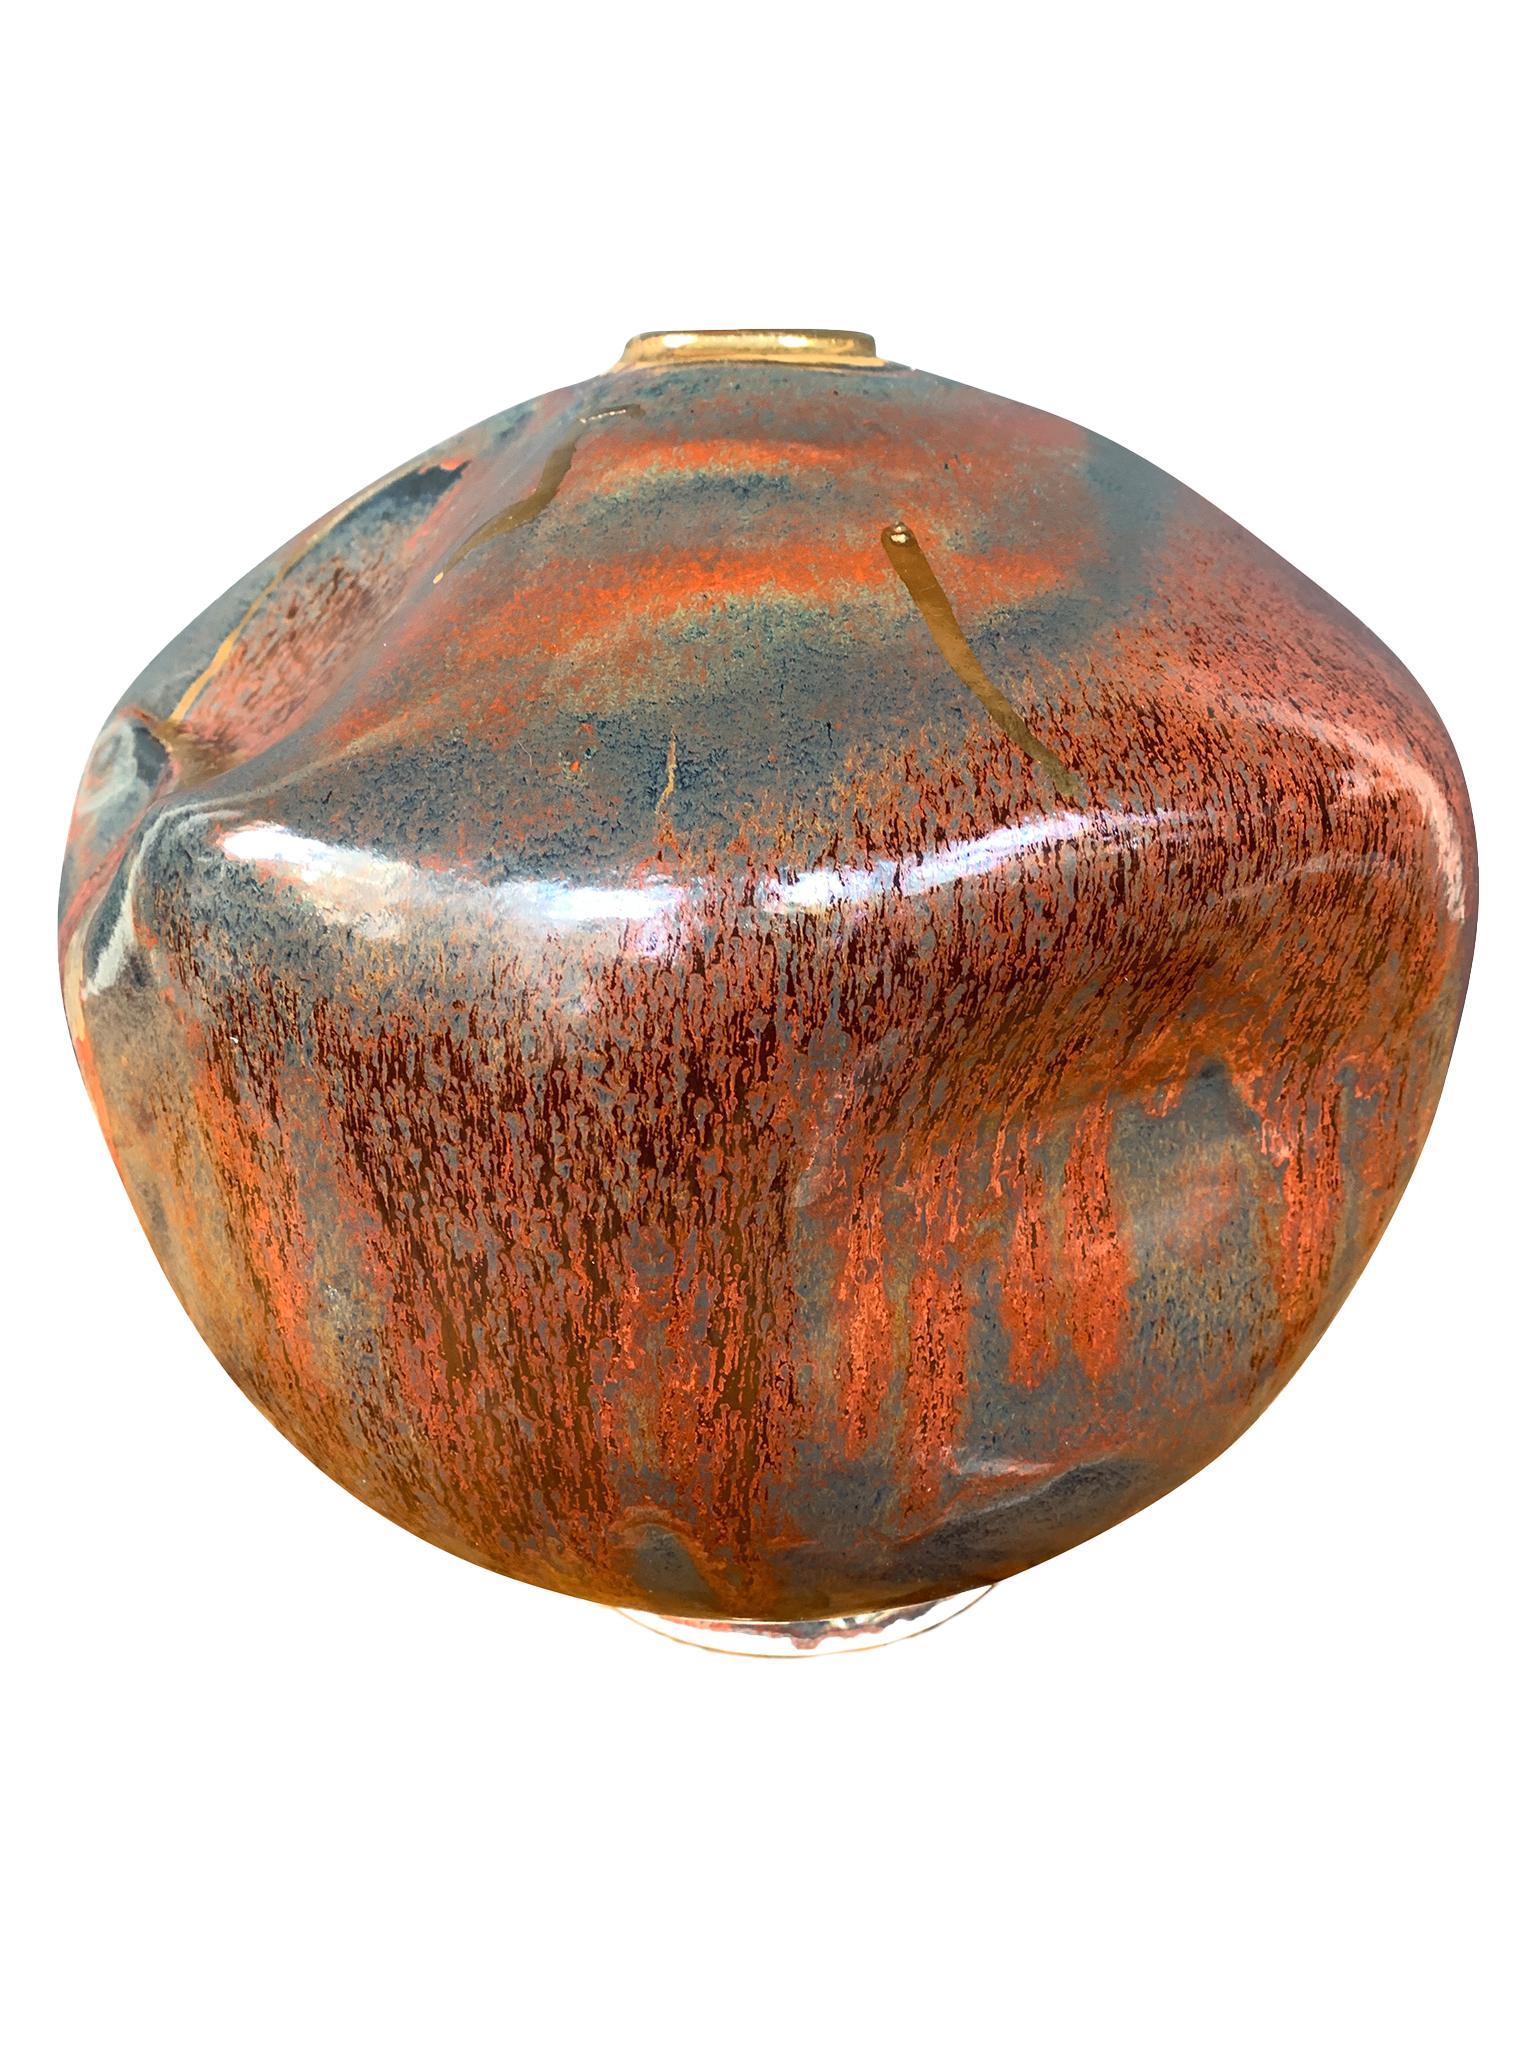 American Thom Lussier Ceramic Vessel #3, from the Golden Patina Collection For Sale